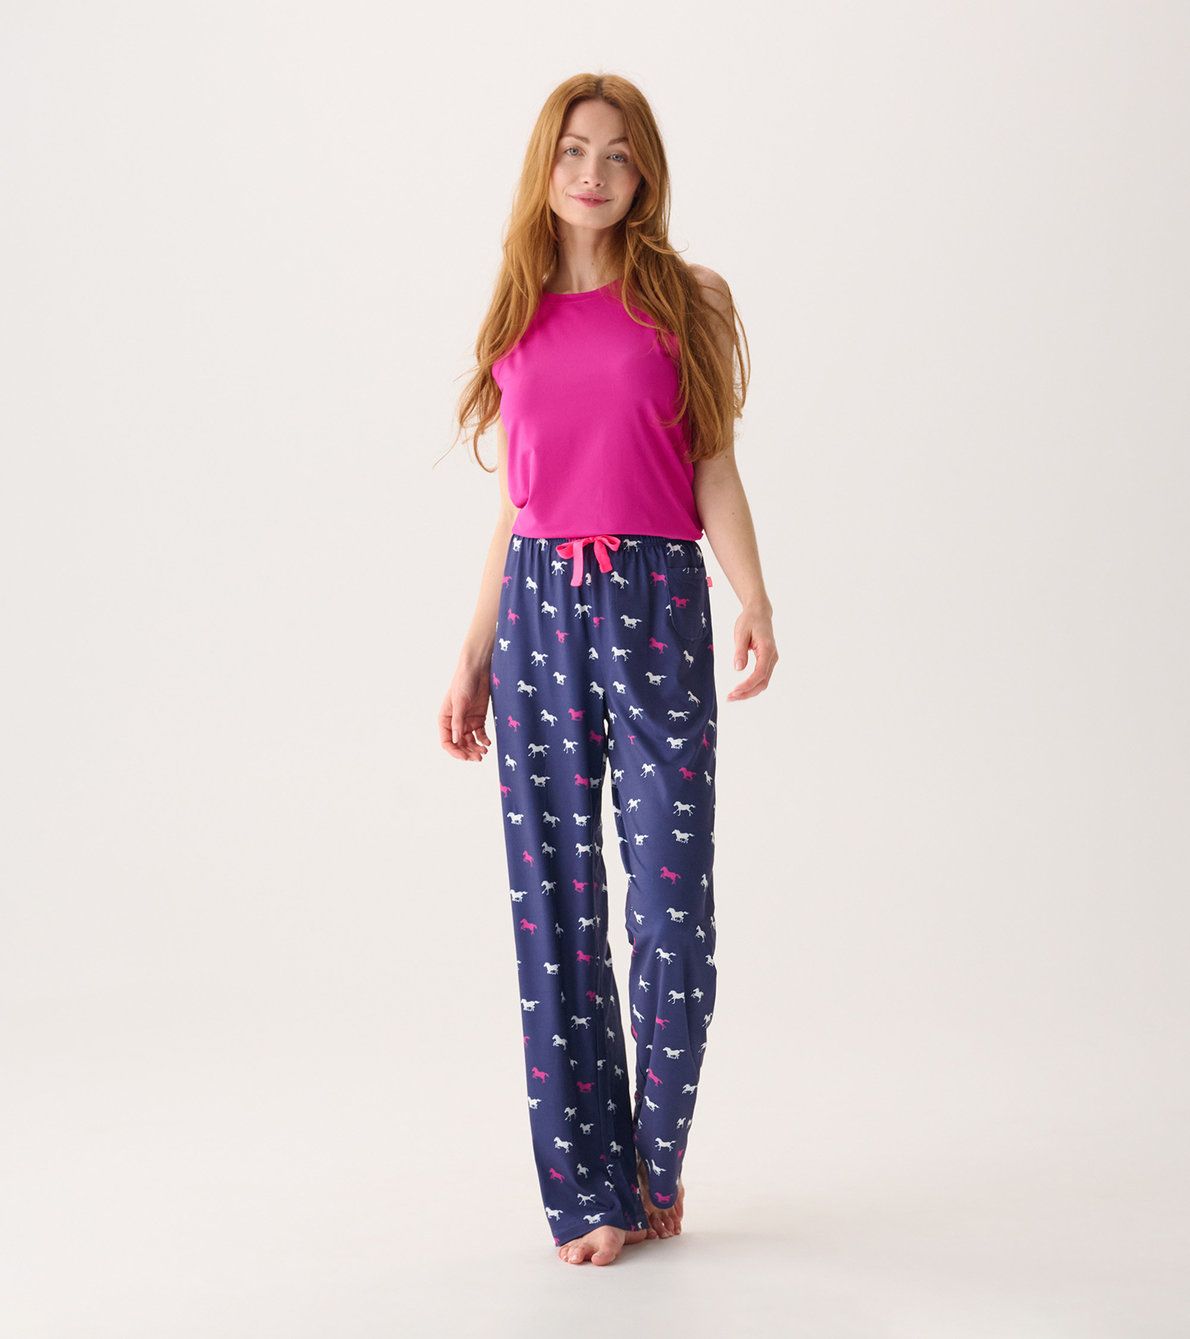 View larger image of Capelton Road Women's Running Horses Pajama Pants